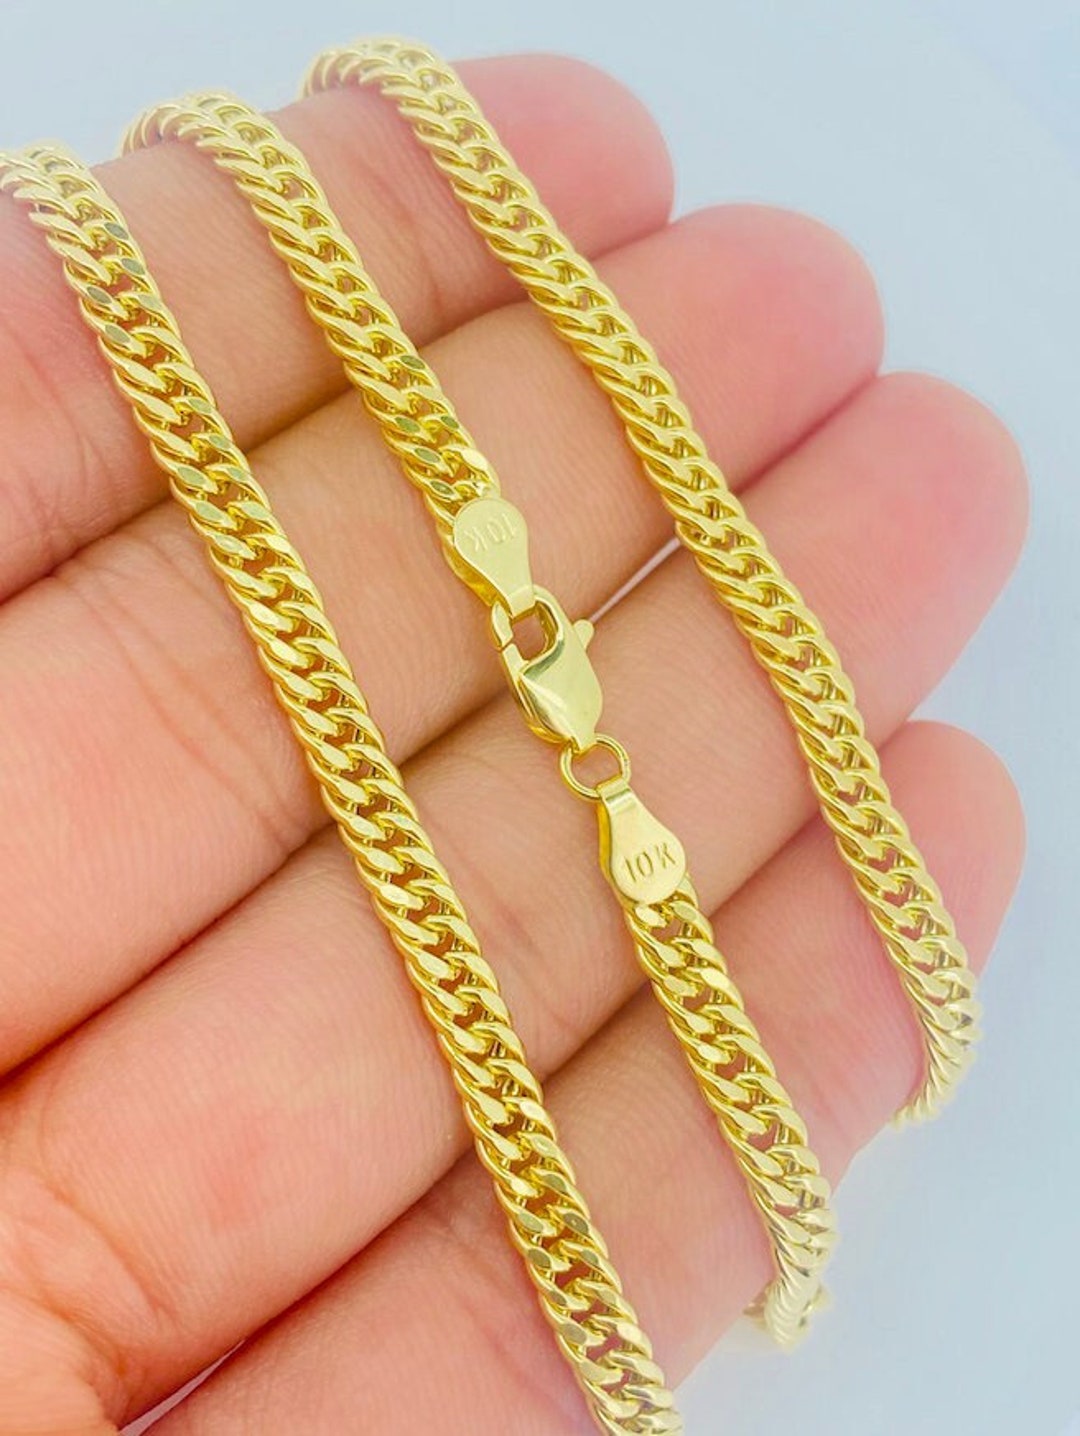 Bracelet Extender Chain Clasp 24k Gold Plated Necklace Jewelry Chain  Extension Sterling Silver Safety Chain for Jewelry Making, 3mm Width 2.3  Length